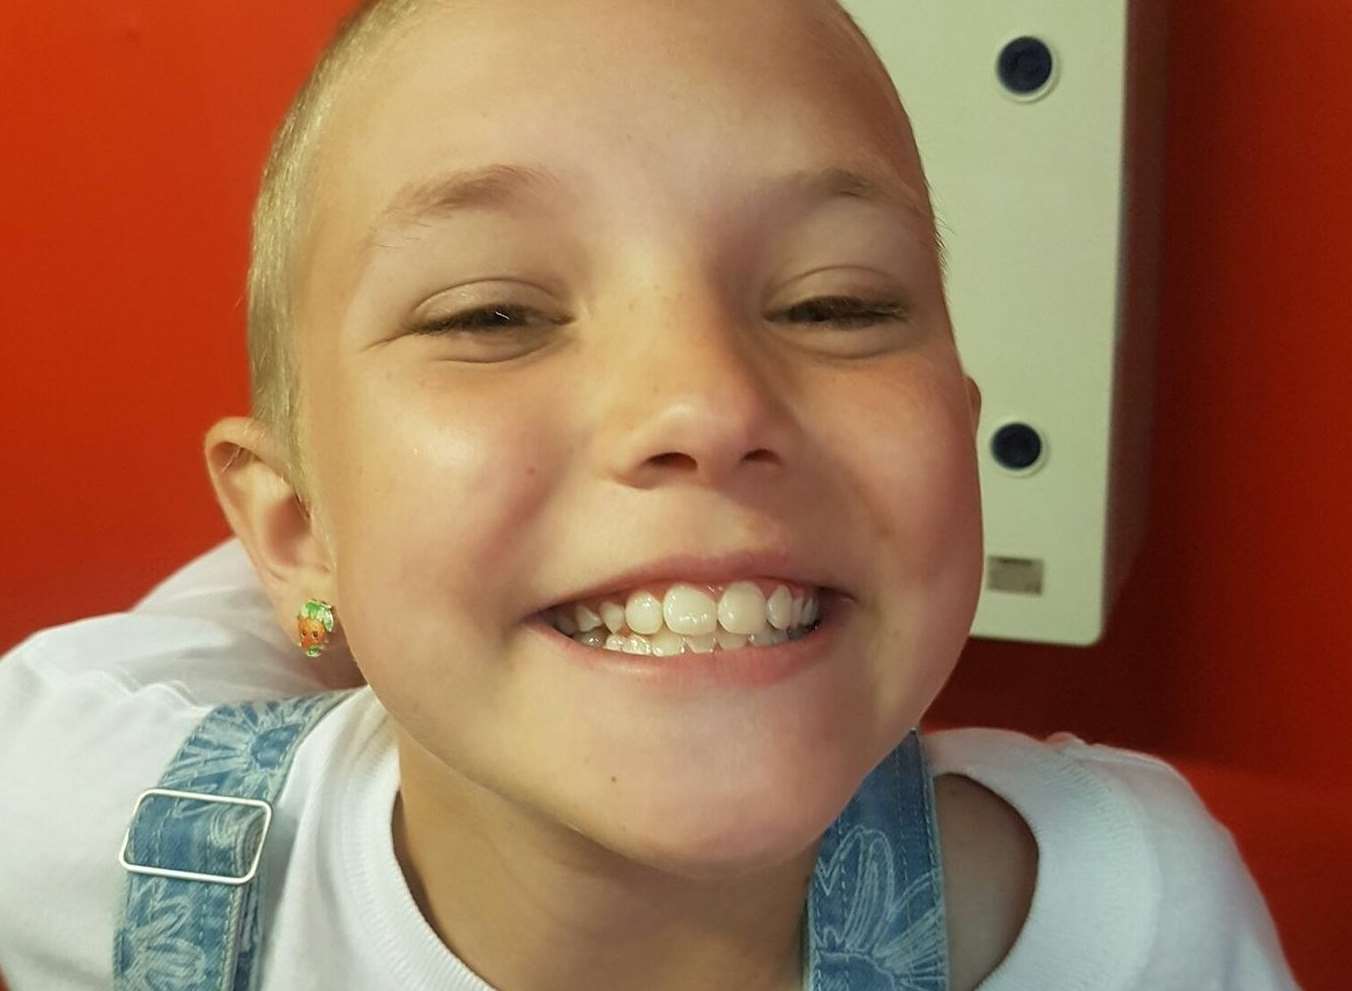 Sian Yeatman, who lost her battle with cancer aged 11